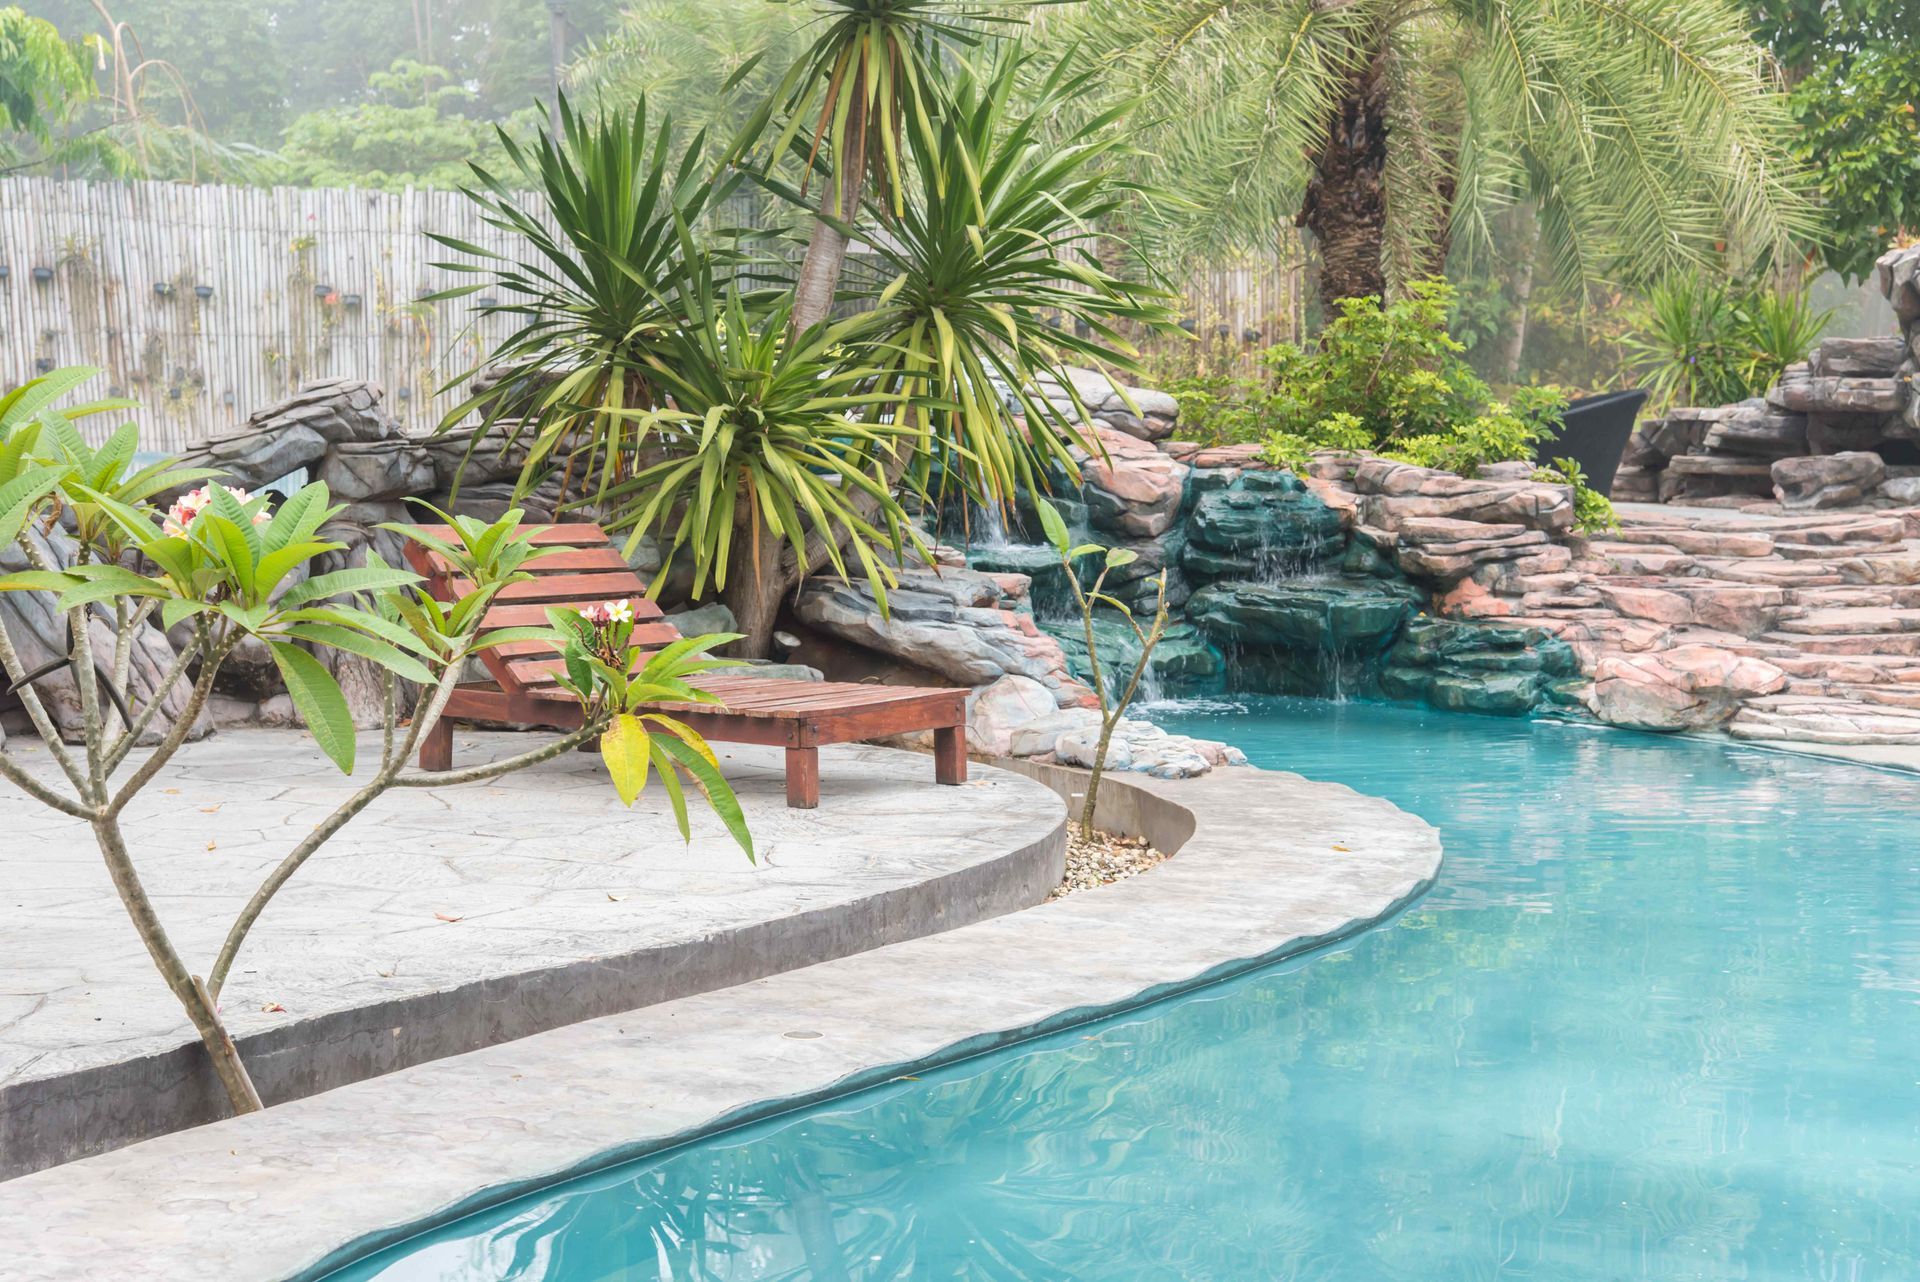 Pool grotto and landscaping elements